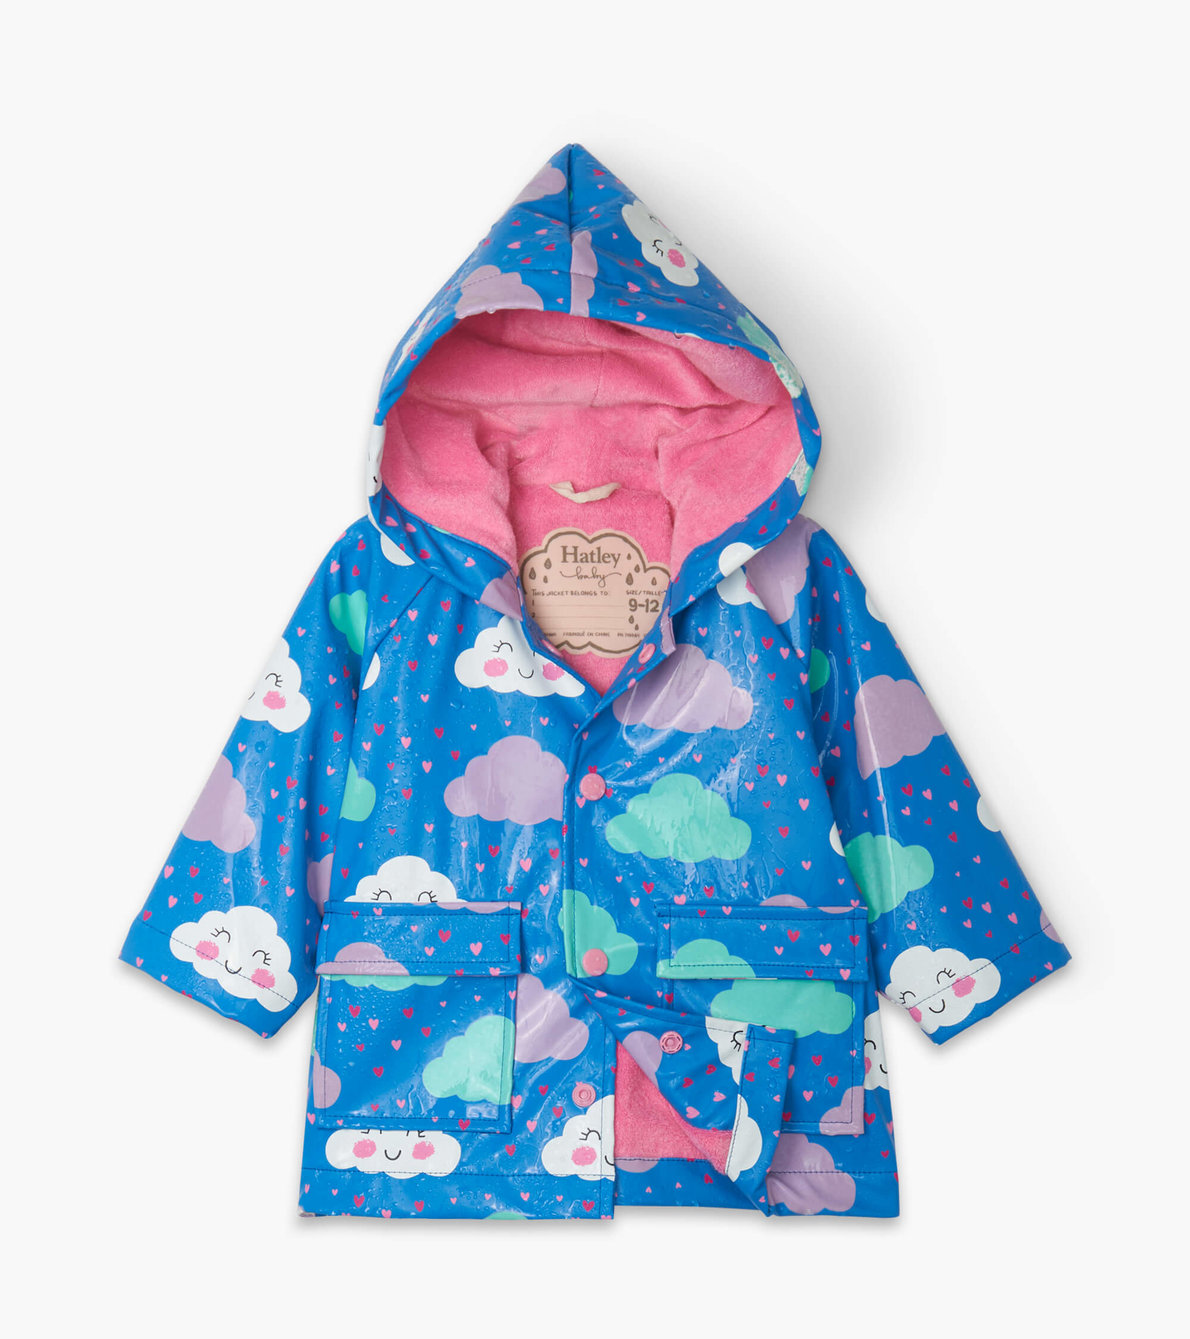 View larger image of Cheerful Clouds Colour Changing Baby Raincoat